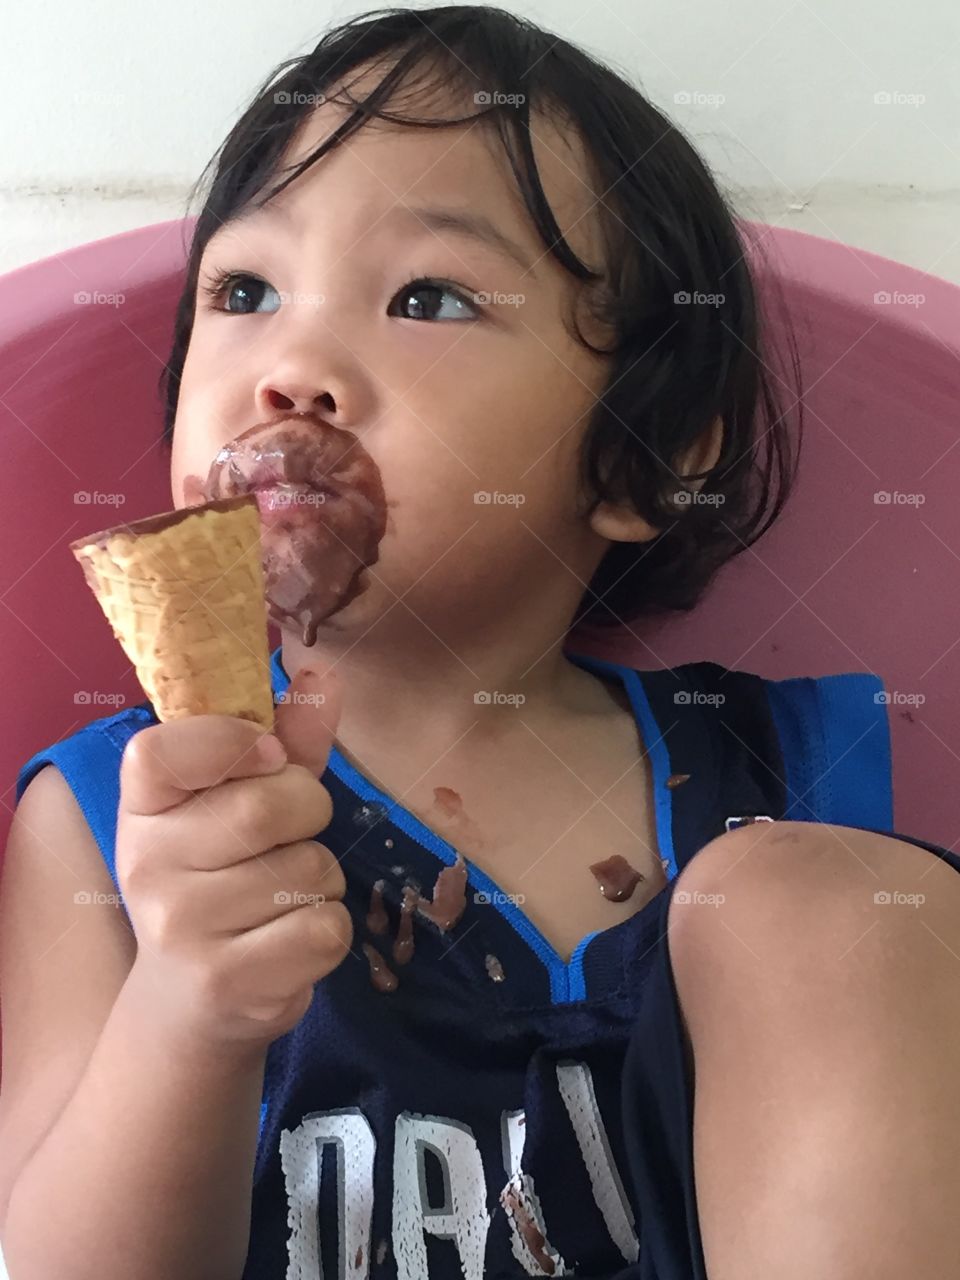 A 2 year old boy eating ice cream